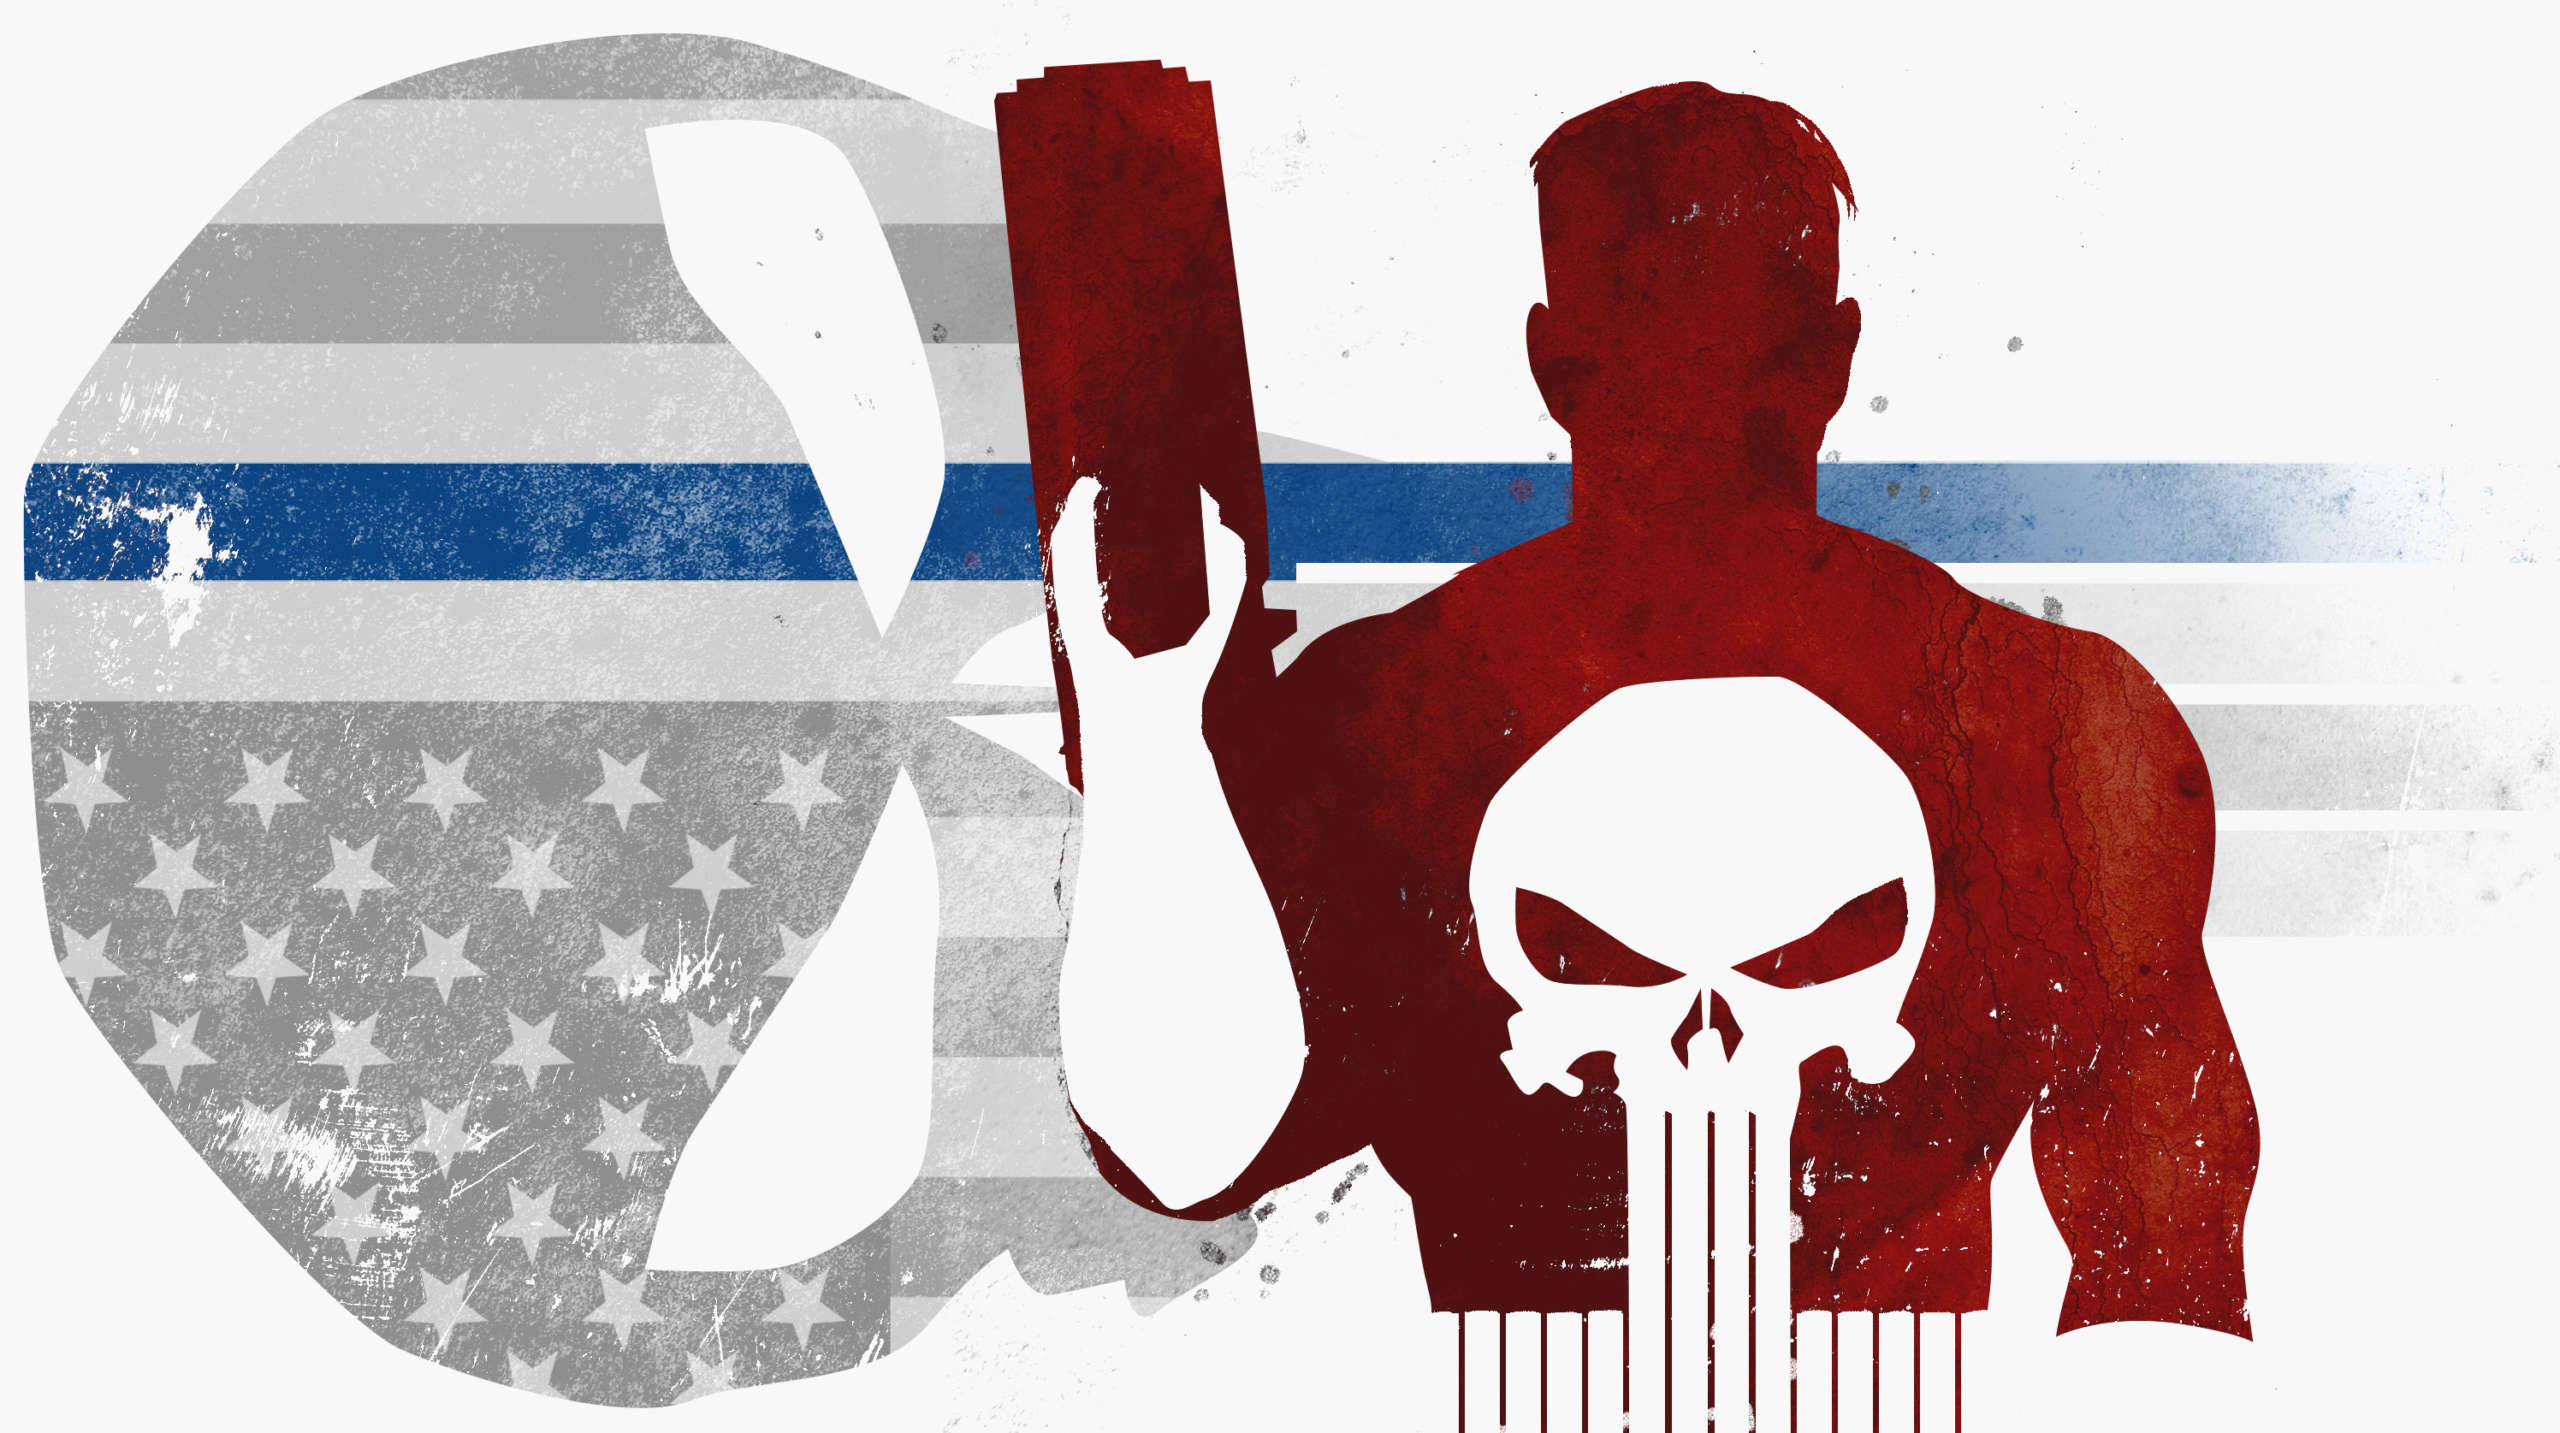 Marvel's “Punisher” Was a Hate Symbol Long Before Police Co-opted His  Character